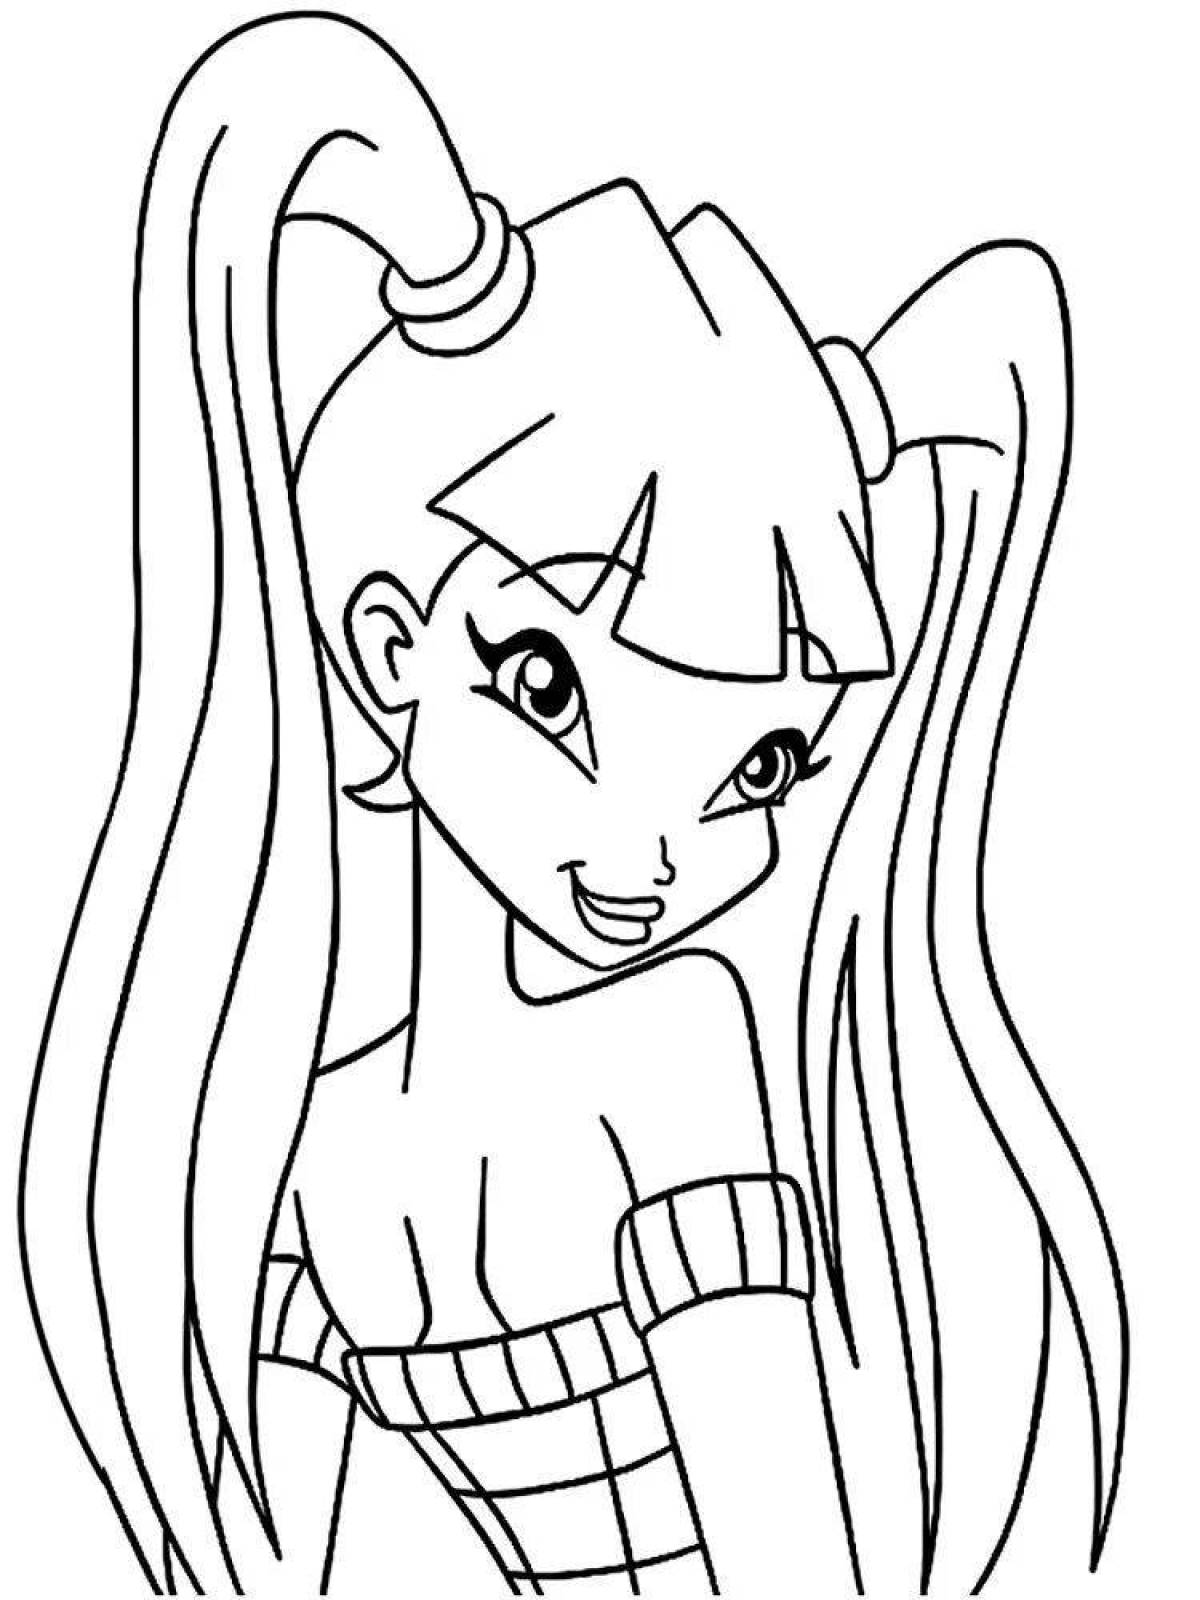 Adorable black and white coloring book for girls